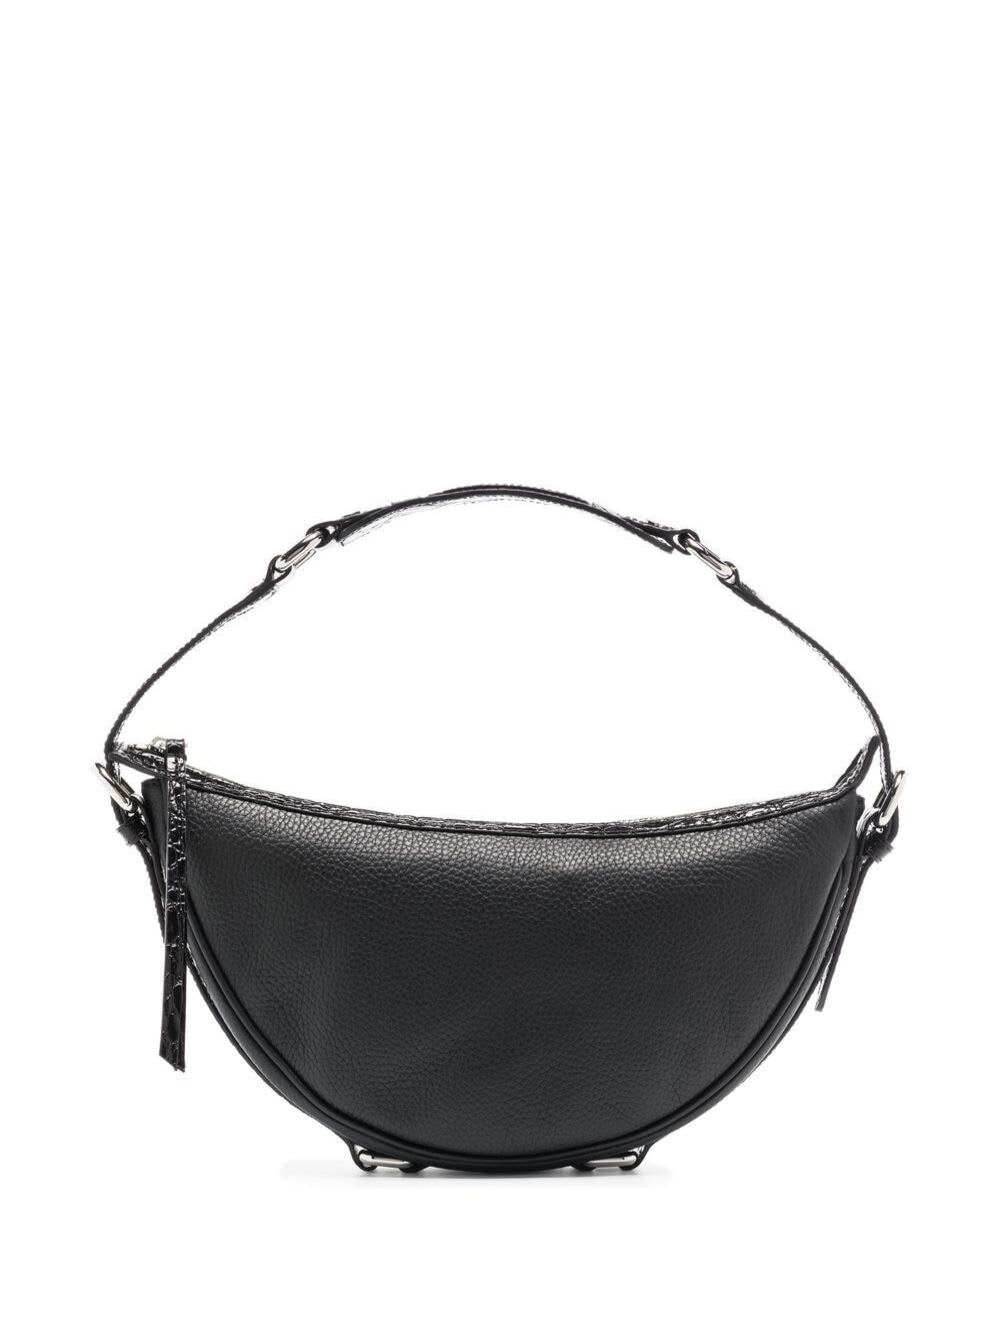 BY FAR Black Leather Handbag With Silver-colored Details Woman